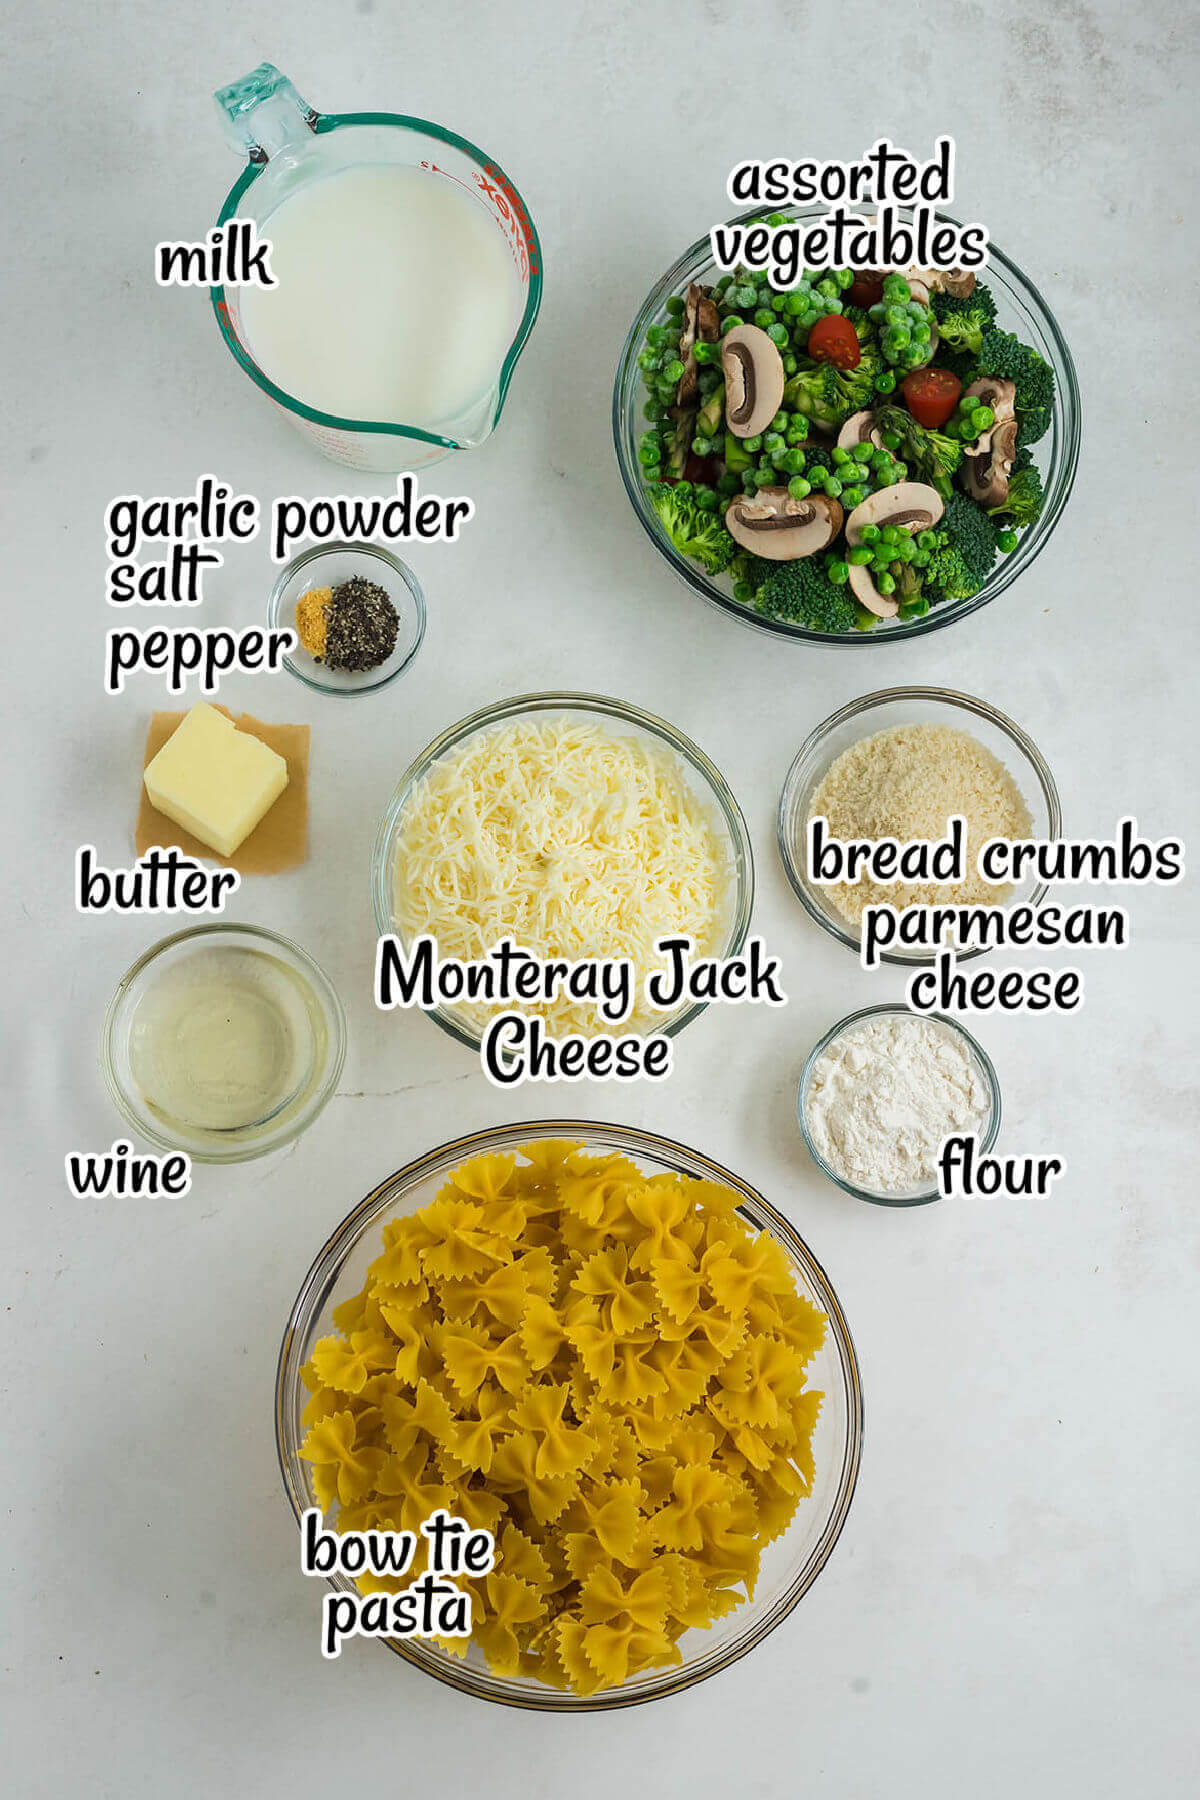 All of the ingredients needed for this recipe, with print overlay.